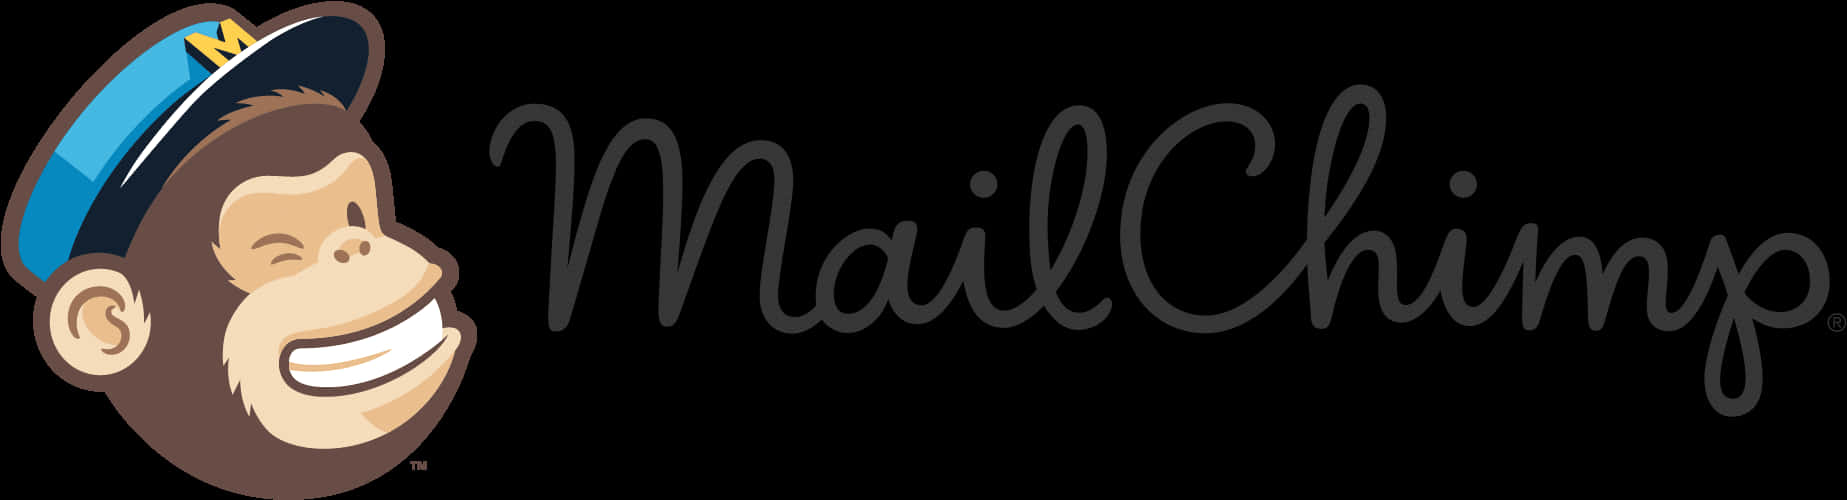 Mailchimp Logowith Mascot